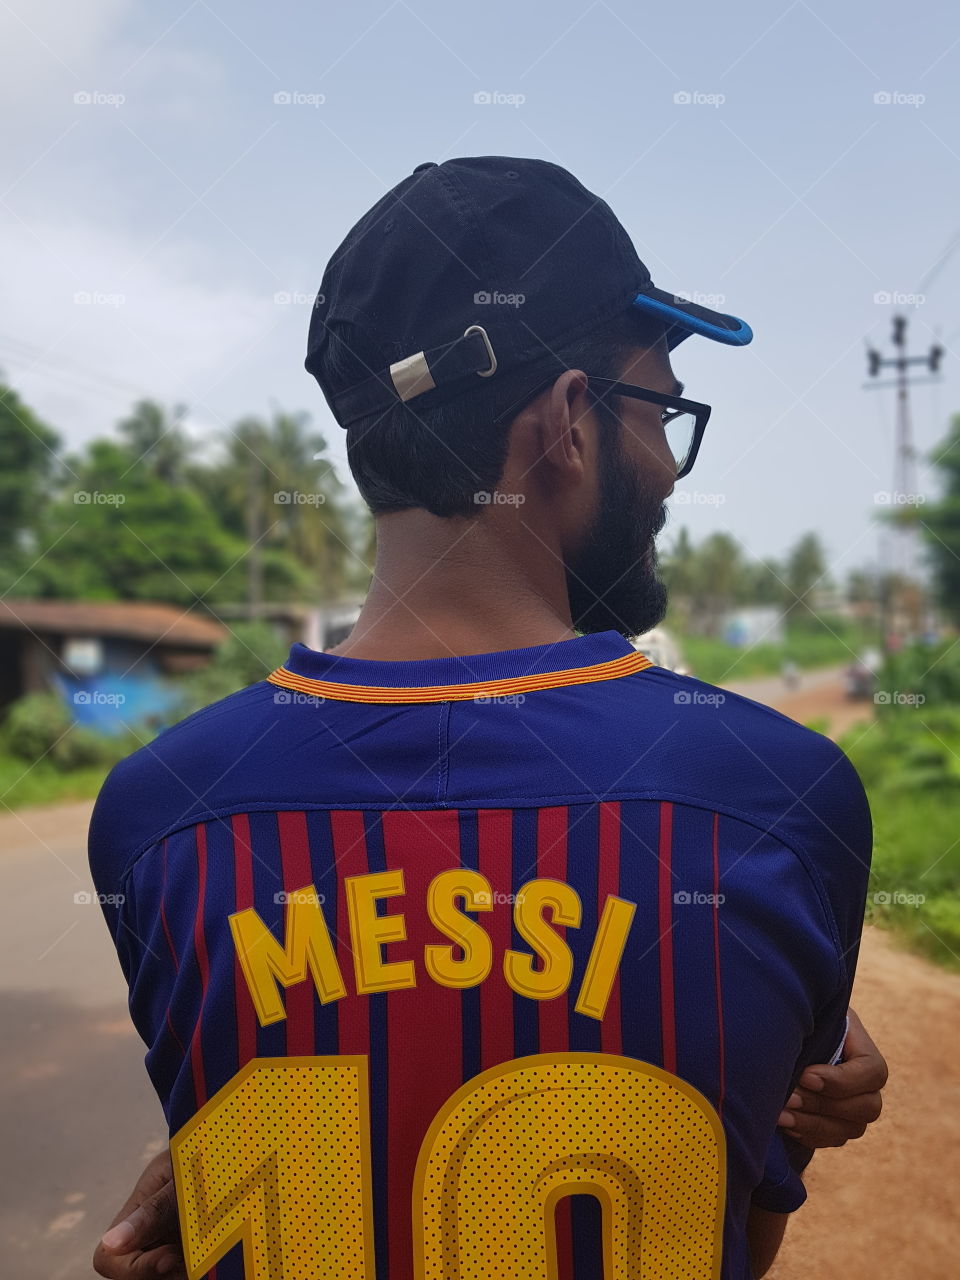 its very proud to wear this messi shirt